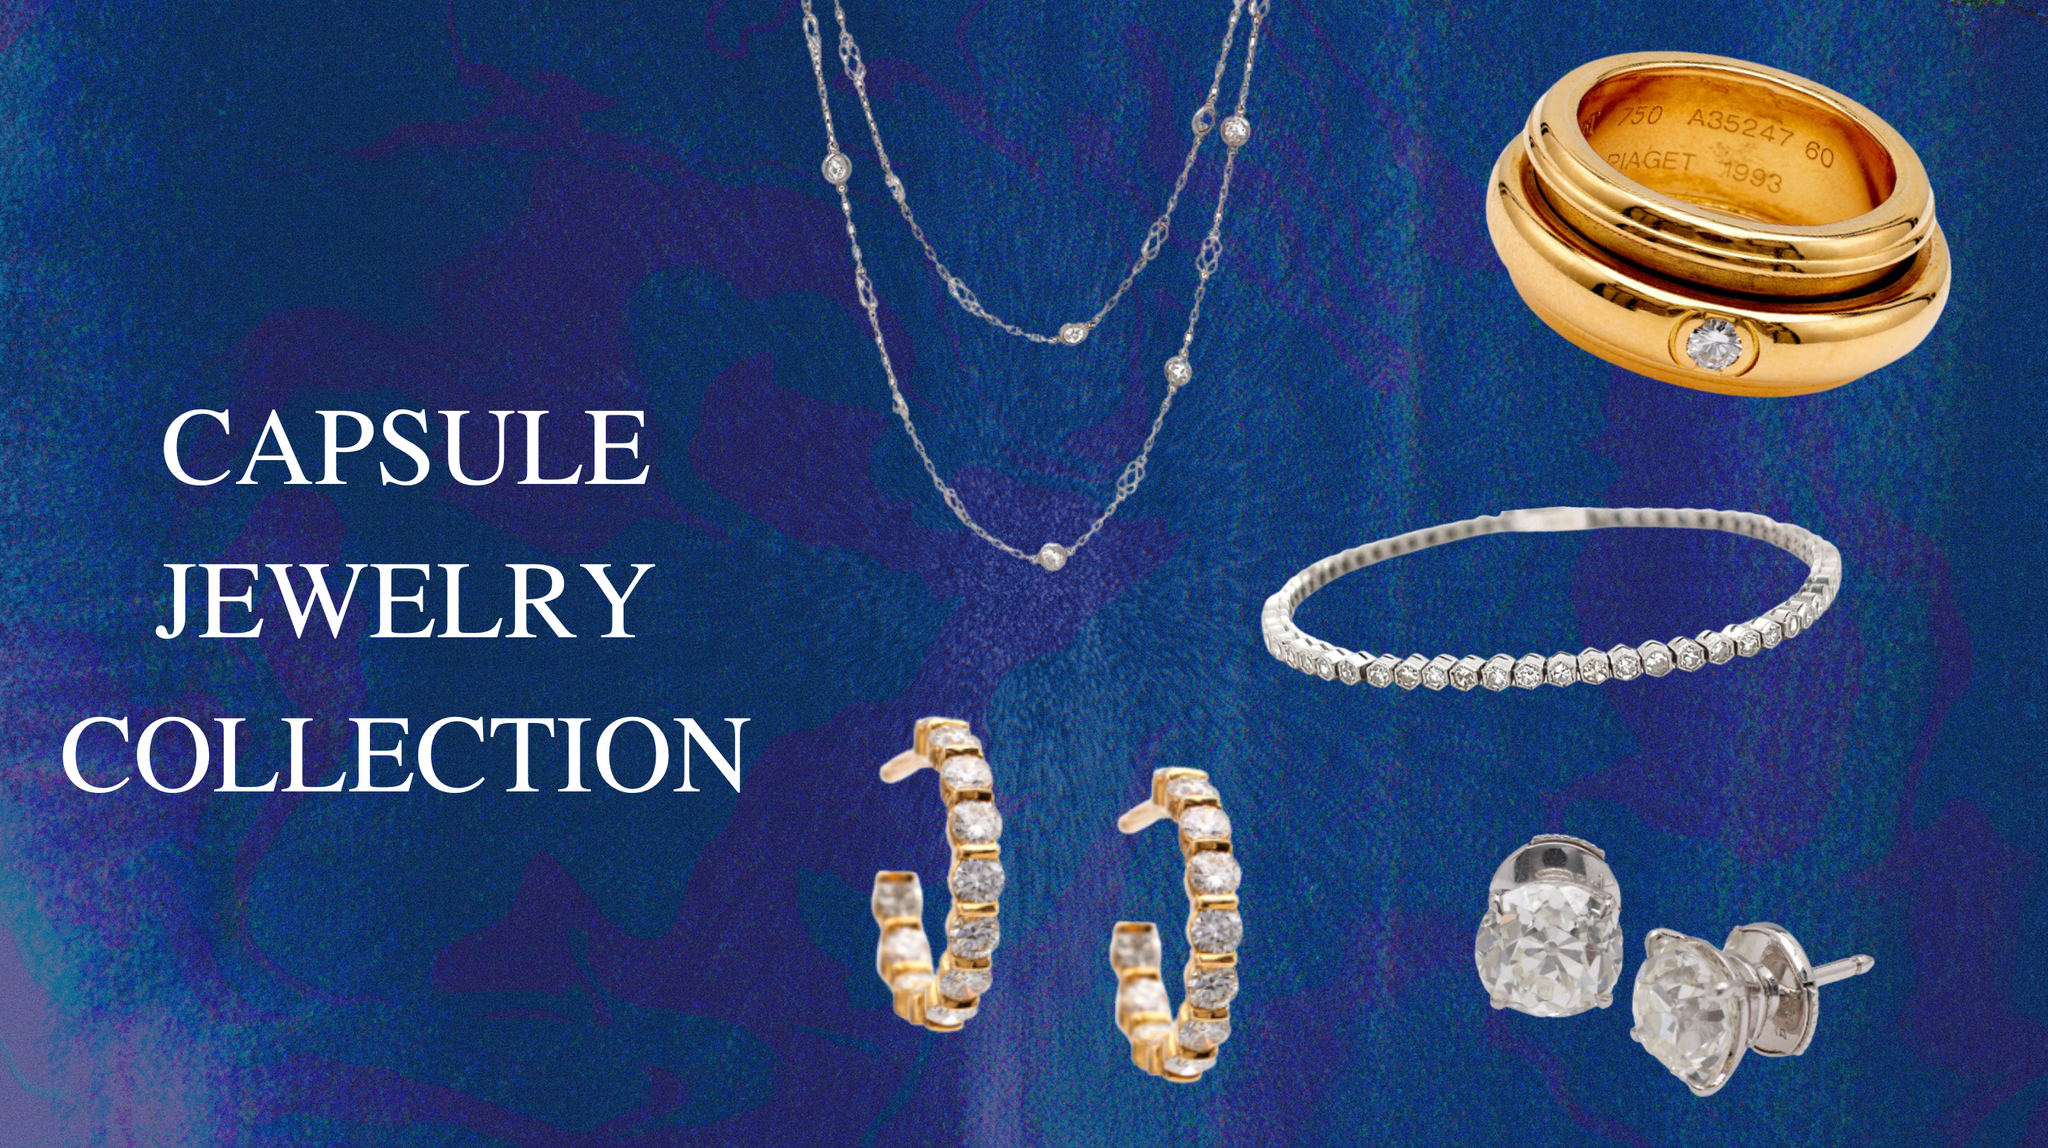 Capsule Jewelry Collection Must Haves - Jack Weir & Sons